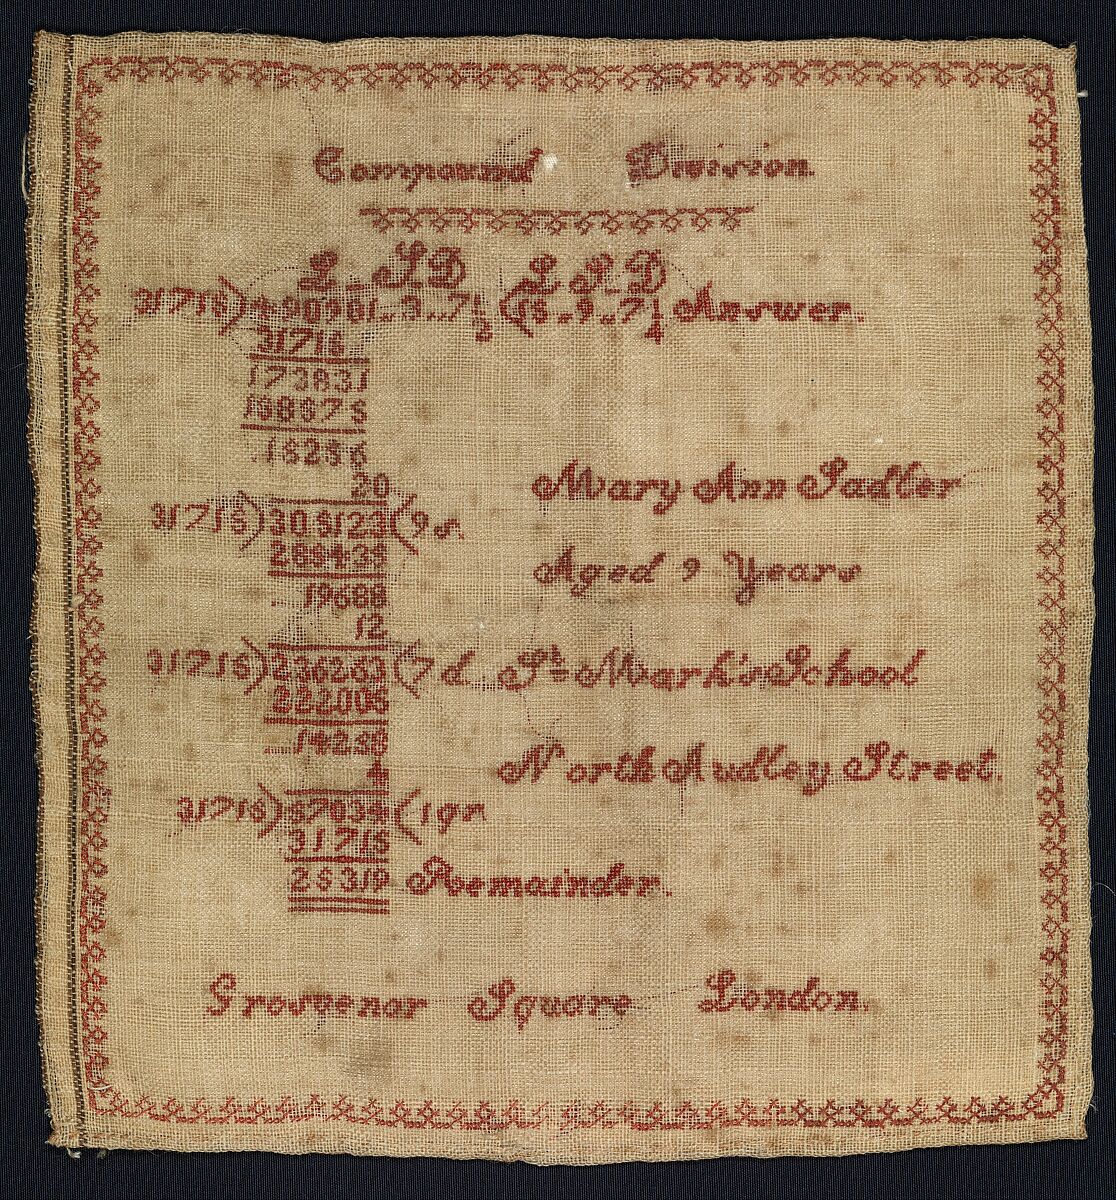 Sampler with compound division equation, Mary Ann Sadler, Silk embroidery on wool, British, London 